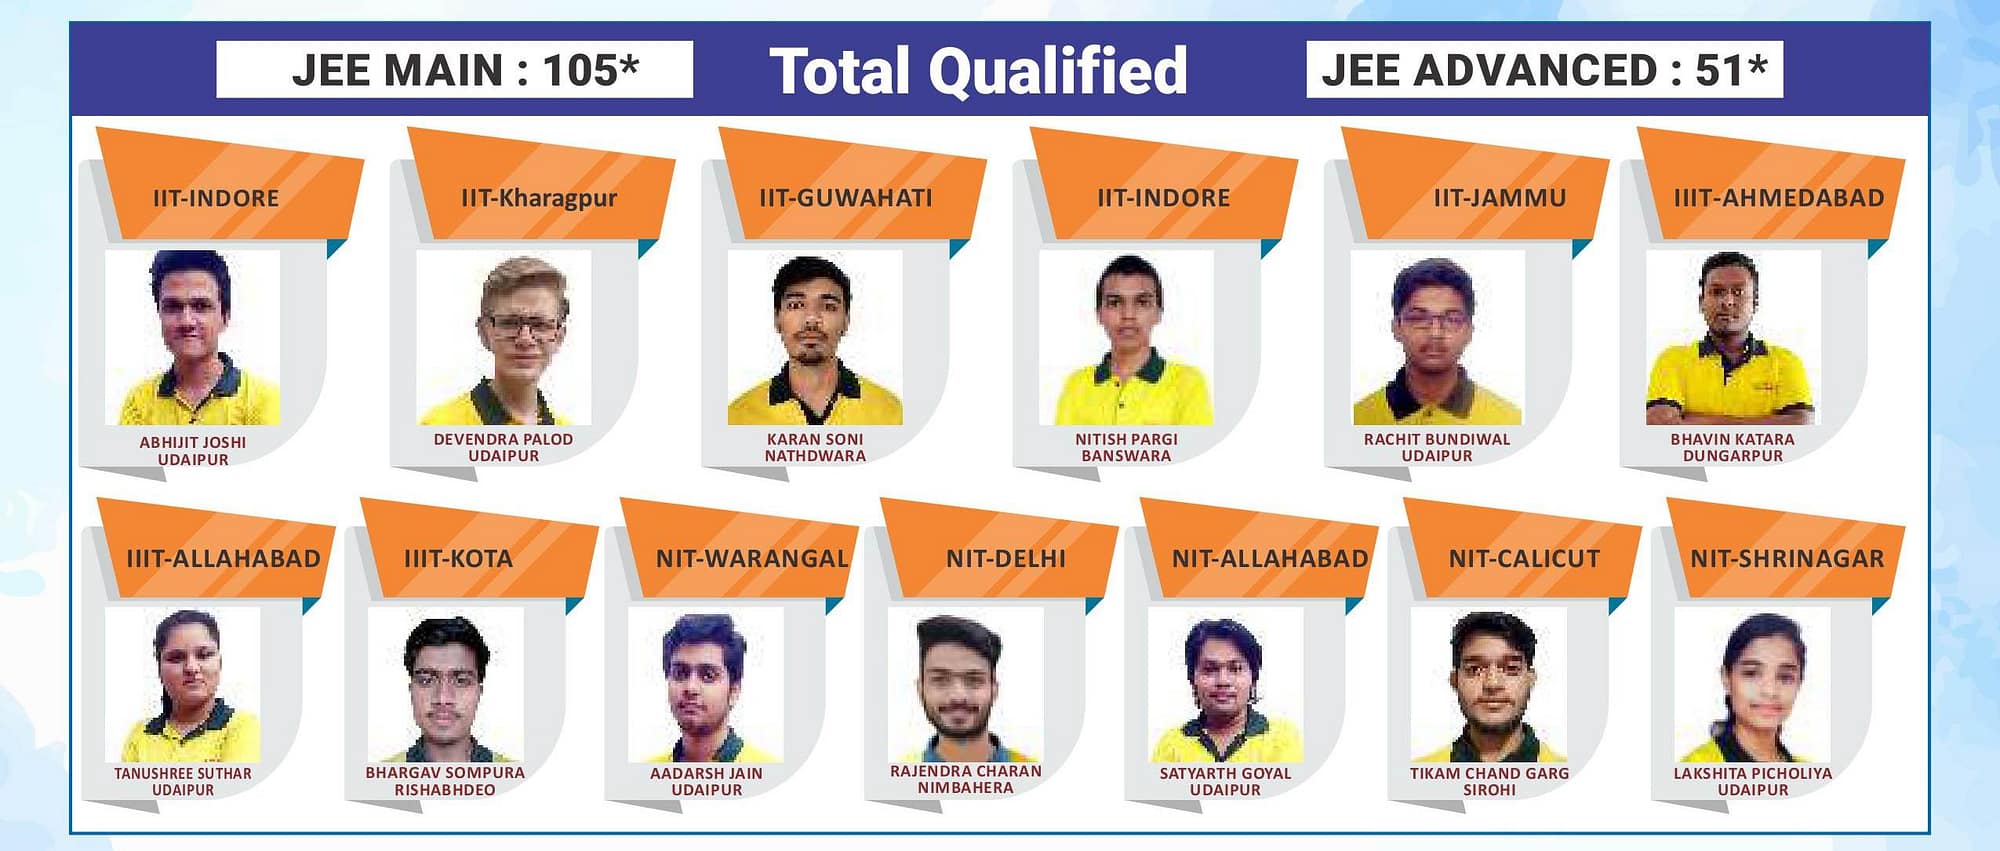 JEE MAIN and ADVANCED total Qualified